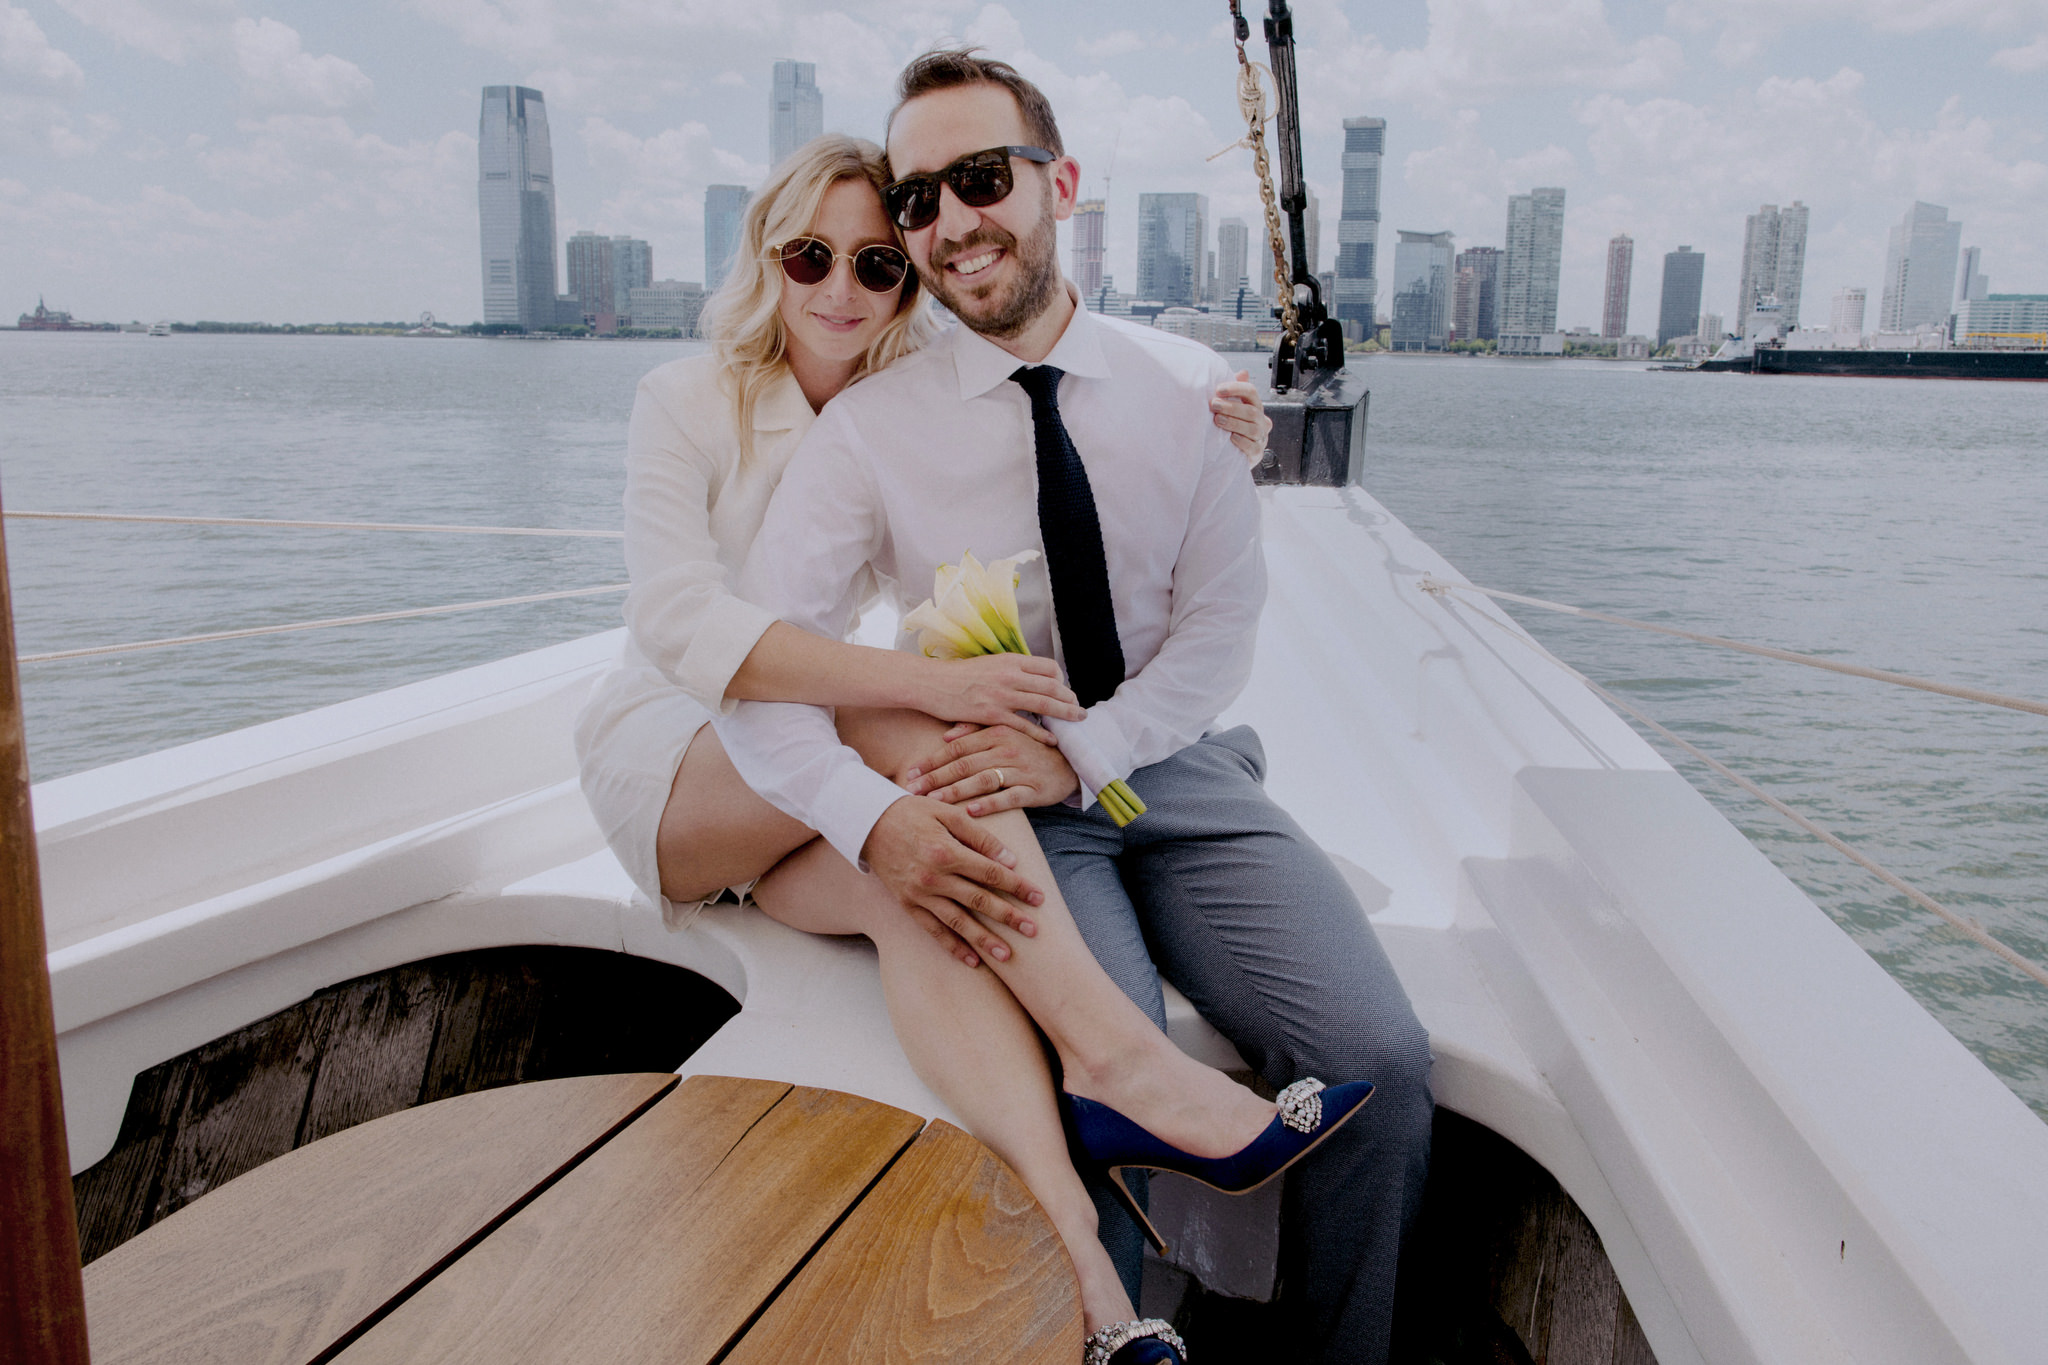 Bride and groom sitting together on boat in Manhattan during micro wedding